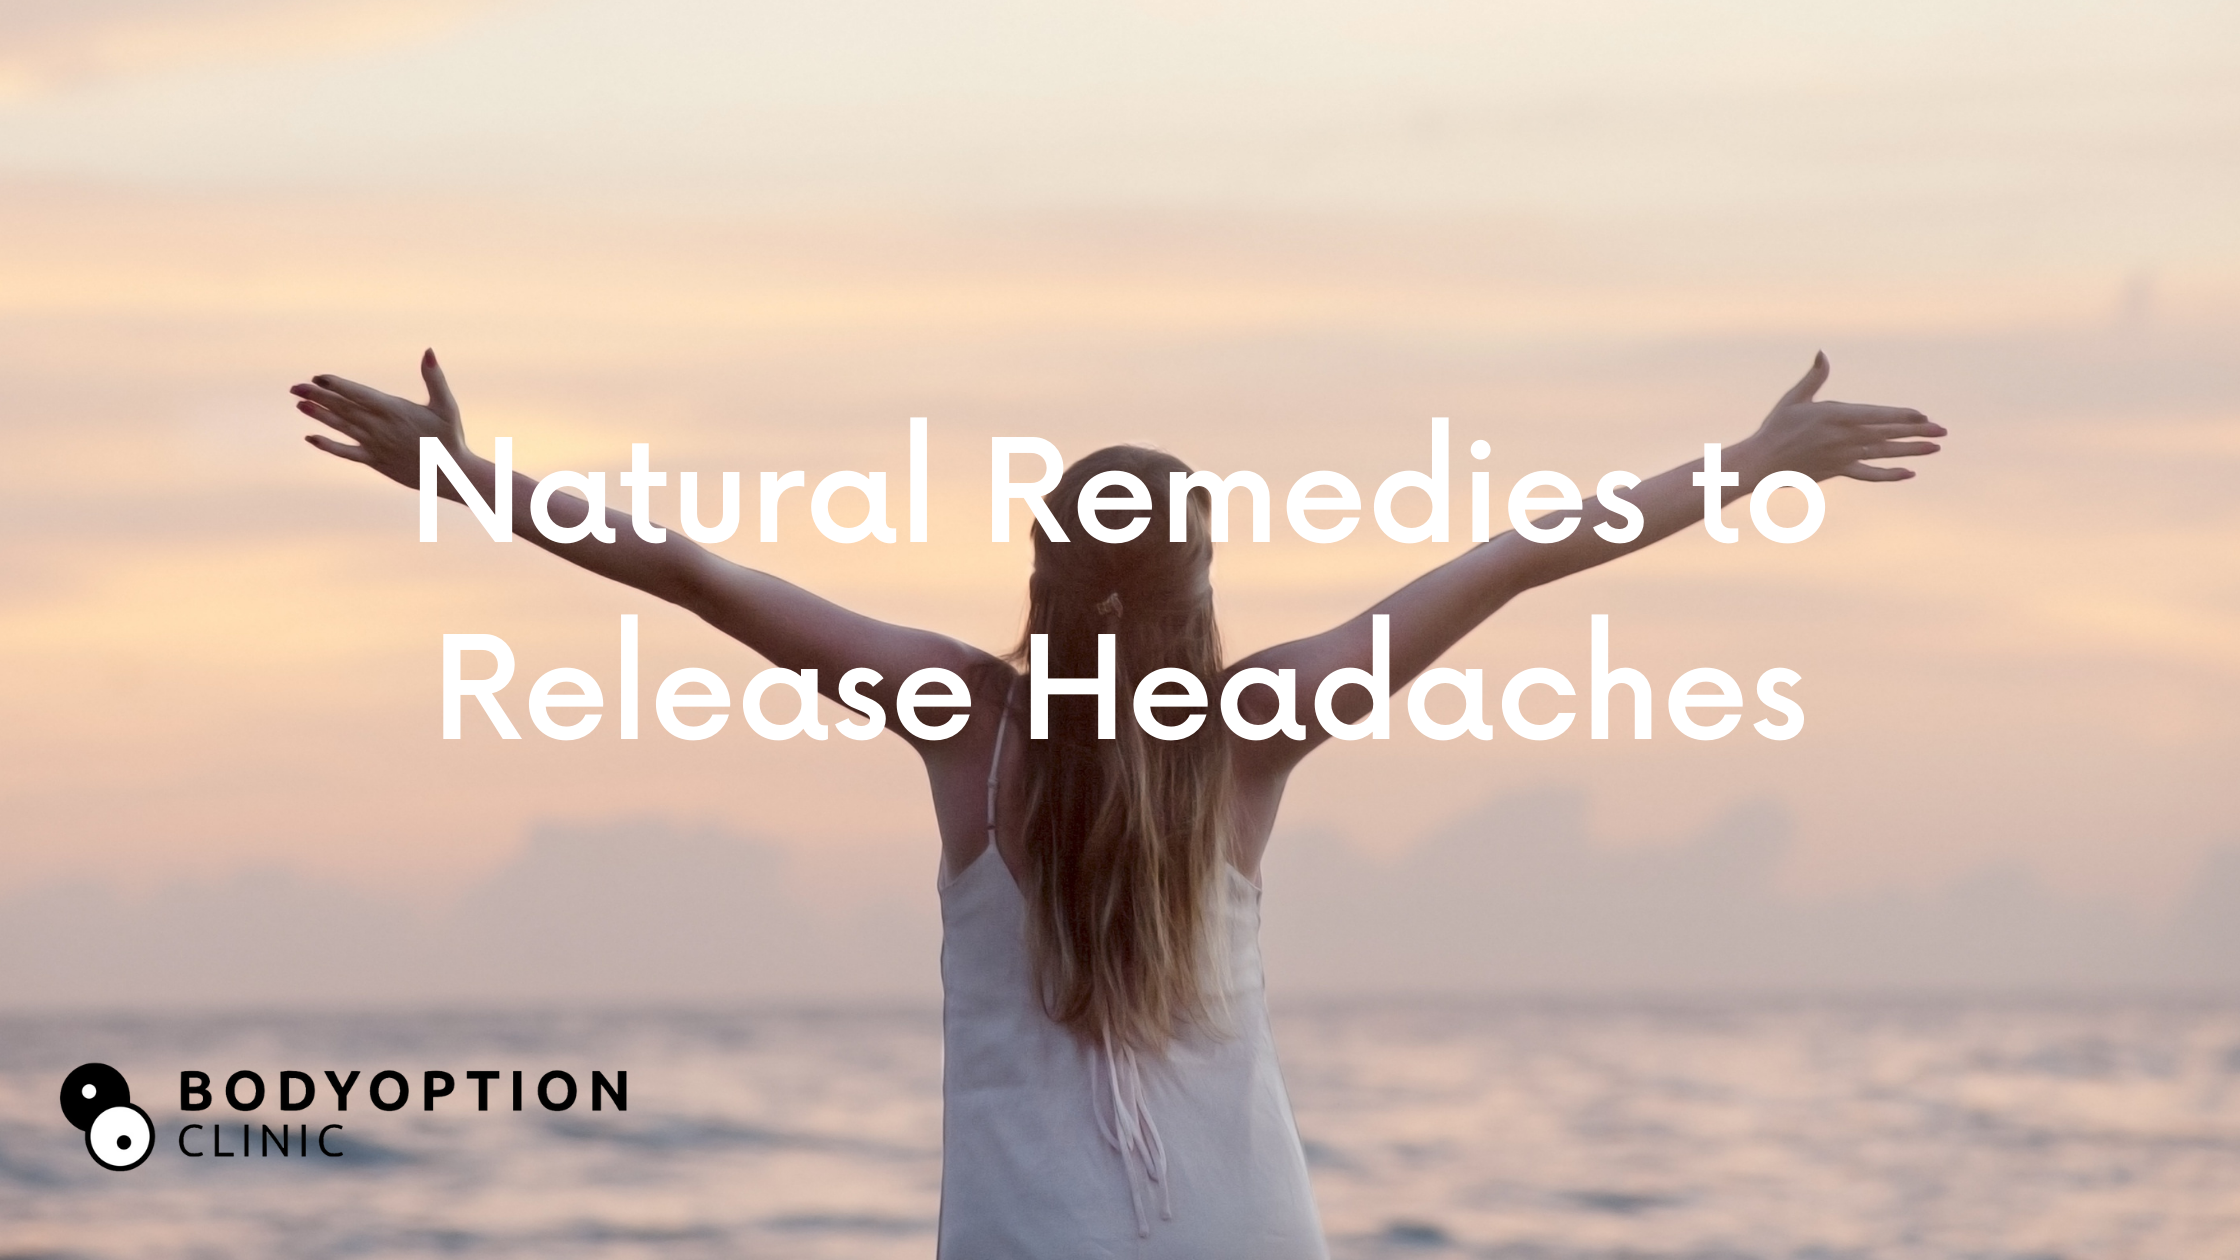 Natural Remedies to Release Headaches